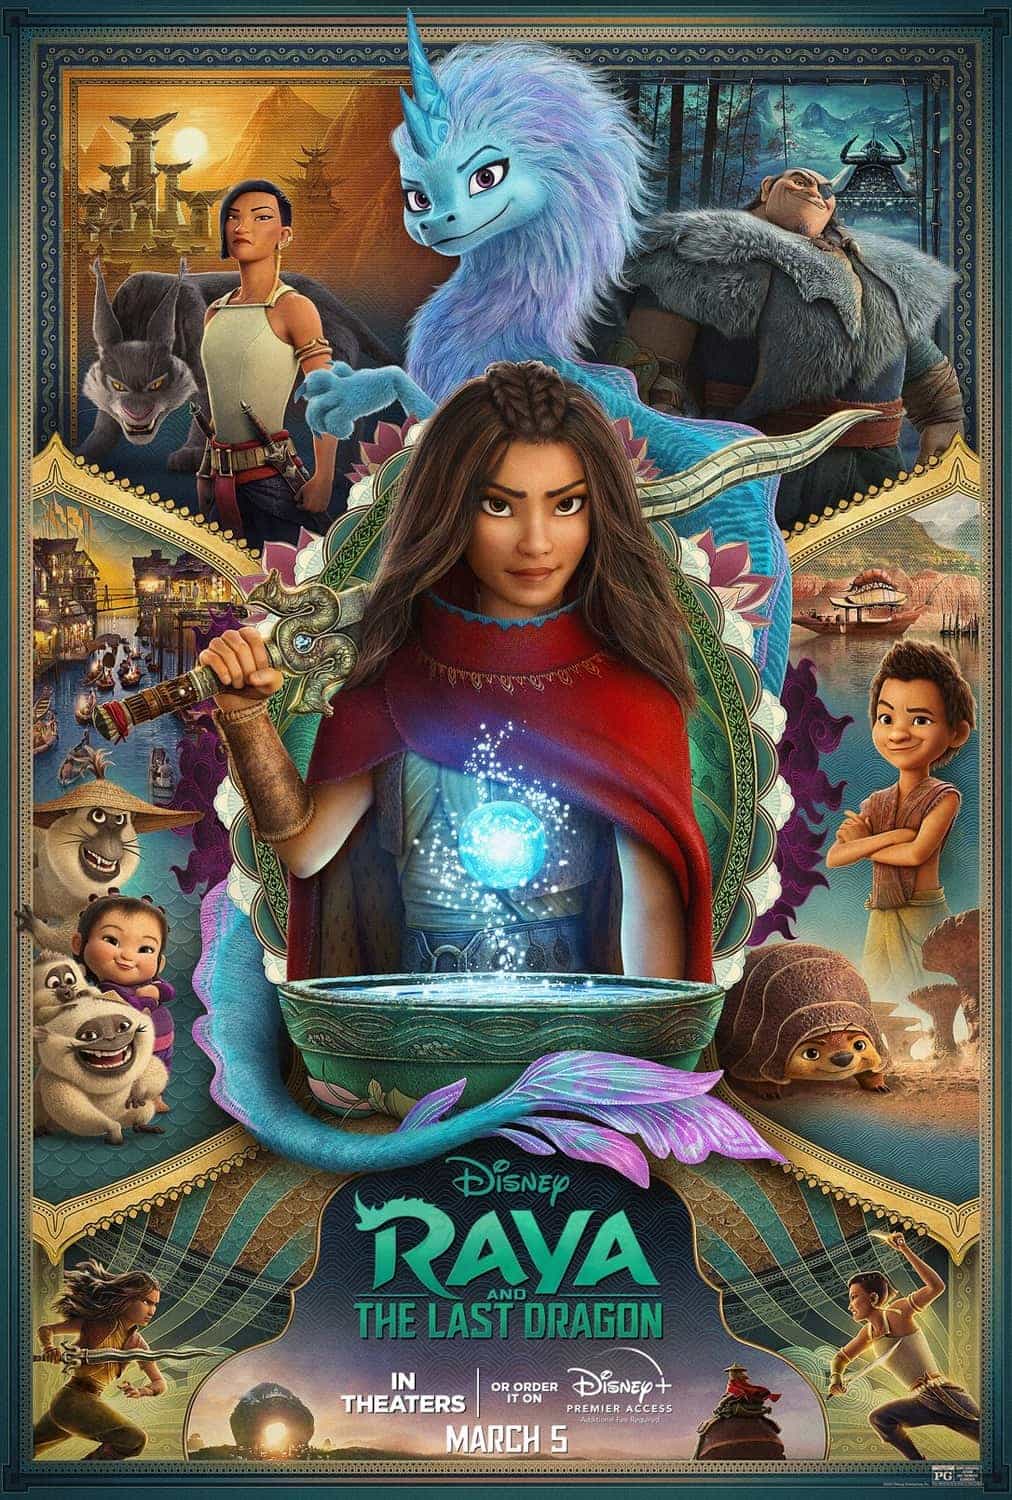 Disney release first poster for Raya And The Last Dragon starring the voice of Awkwafina - movie release date 12th March 2021